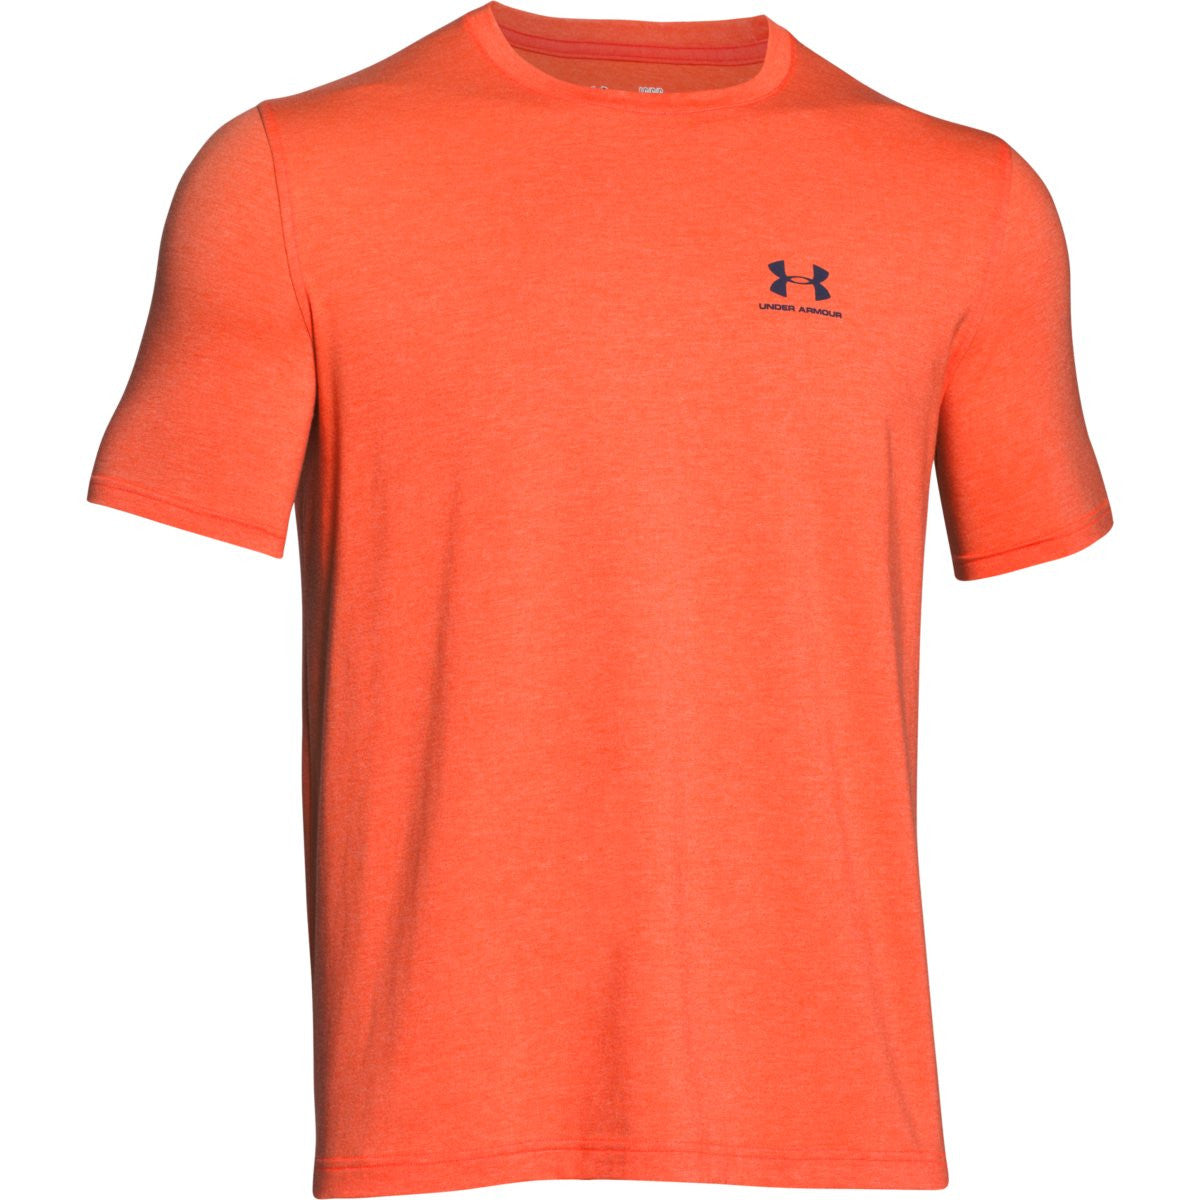  Under Armour Men's Outdoor Pocket T-Shirt, Black (001)/Blaze  Orange, Small : Clothing, Shoes & Jewelry